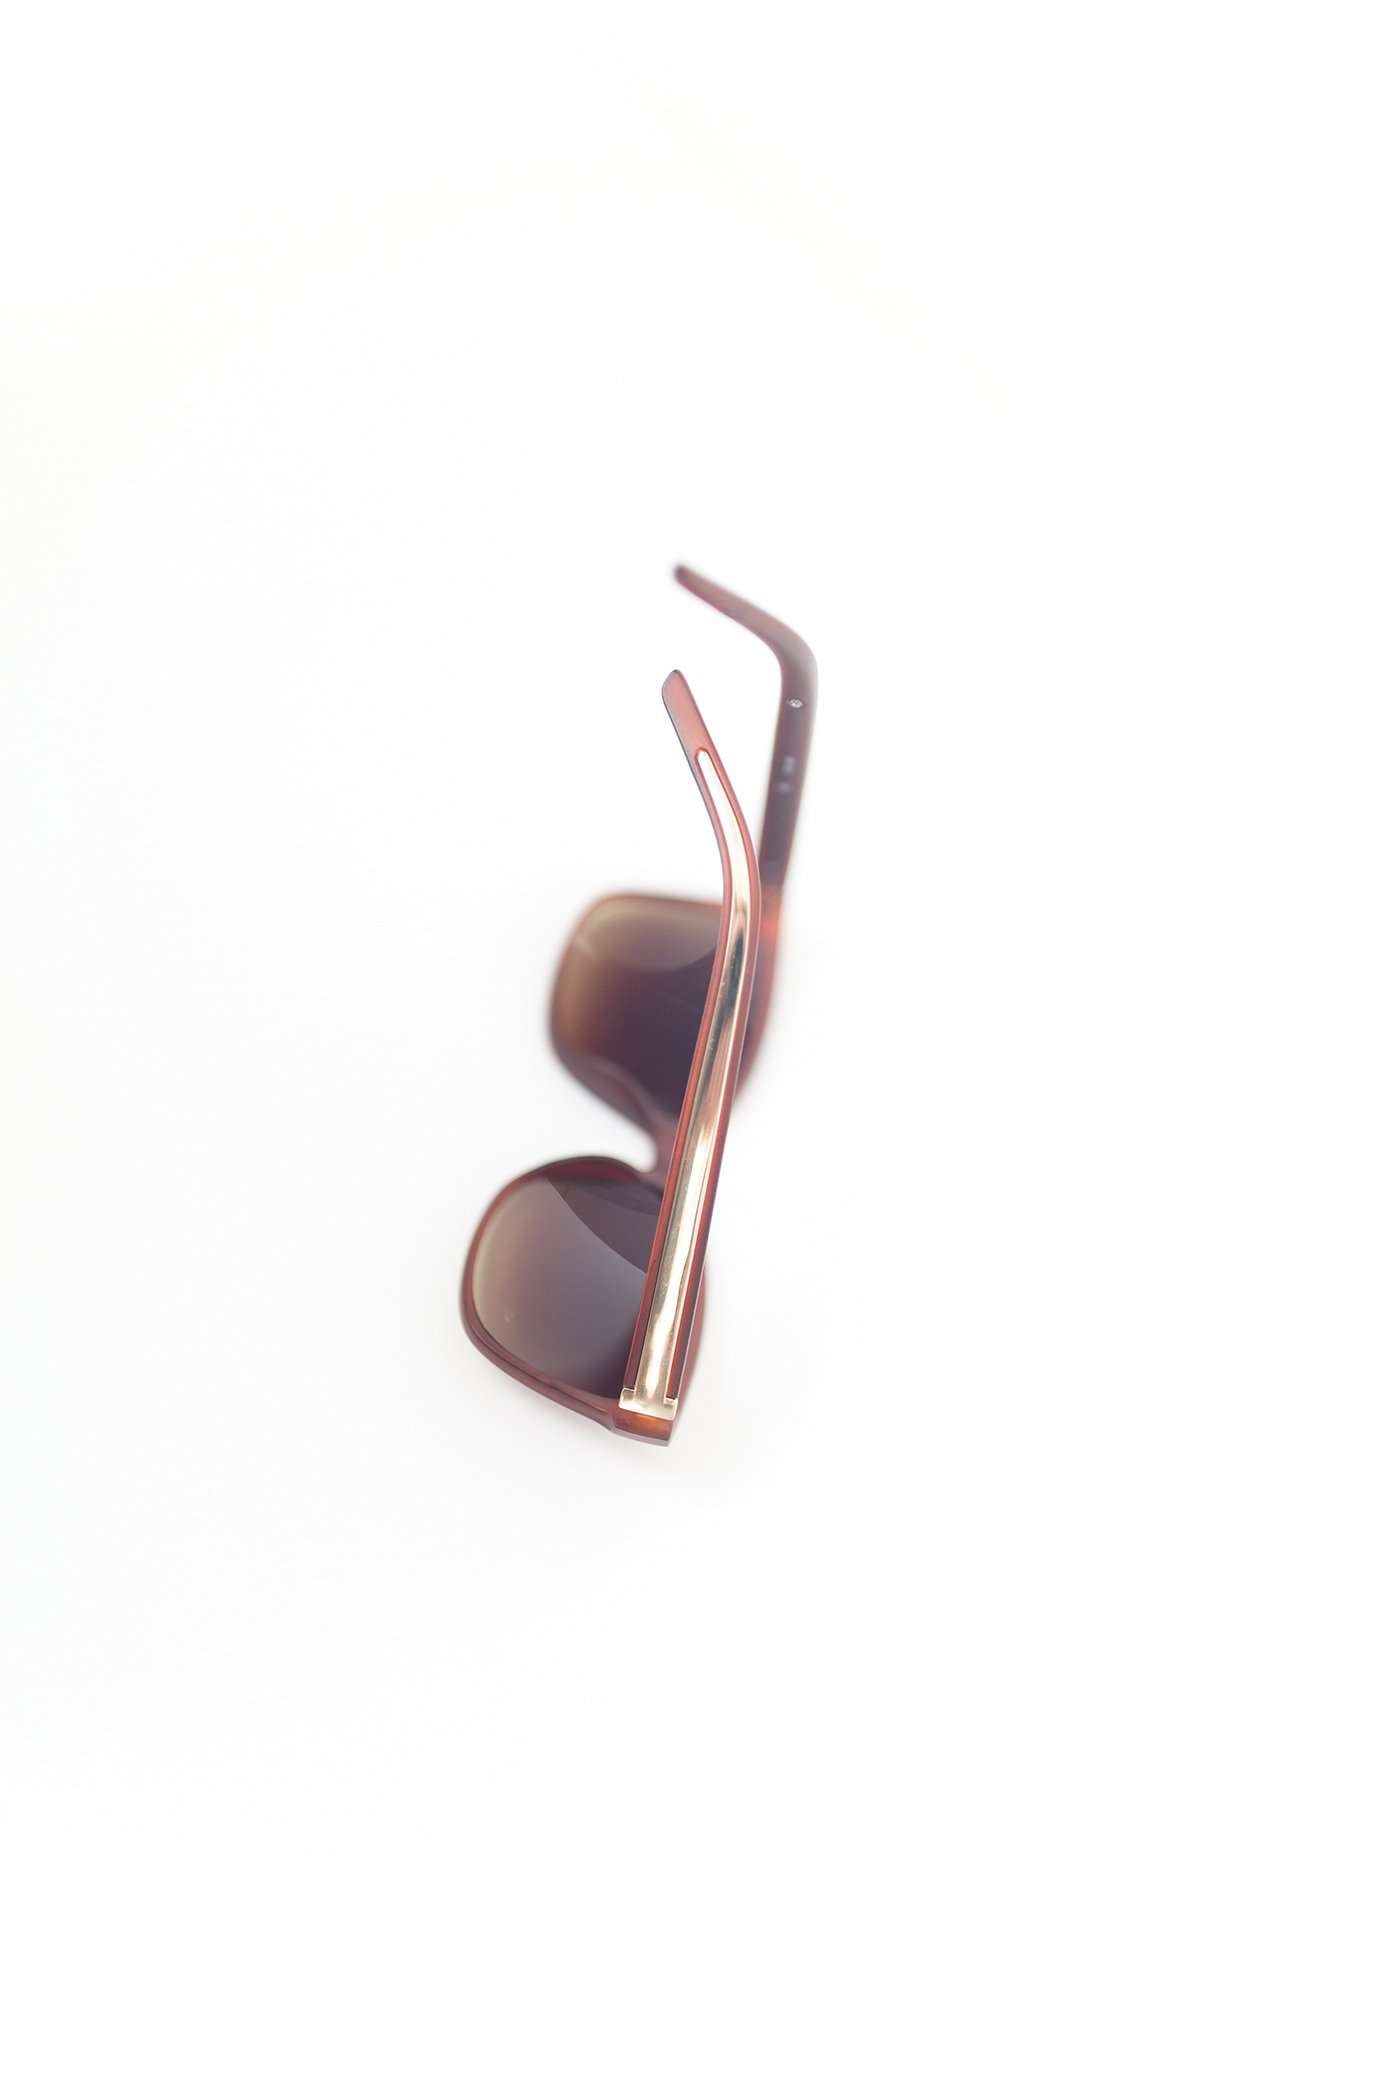 UV 400 protection classic fit sunglasses. Gold accent on the side, comes in black, toroishell, brown or beige.